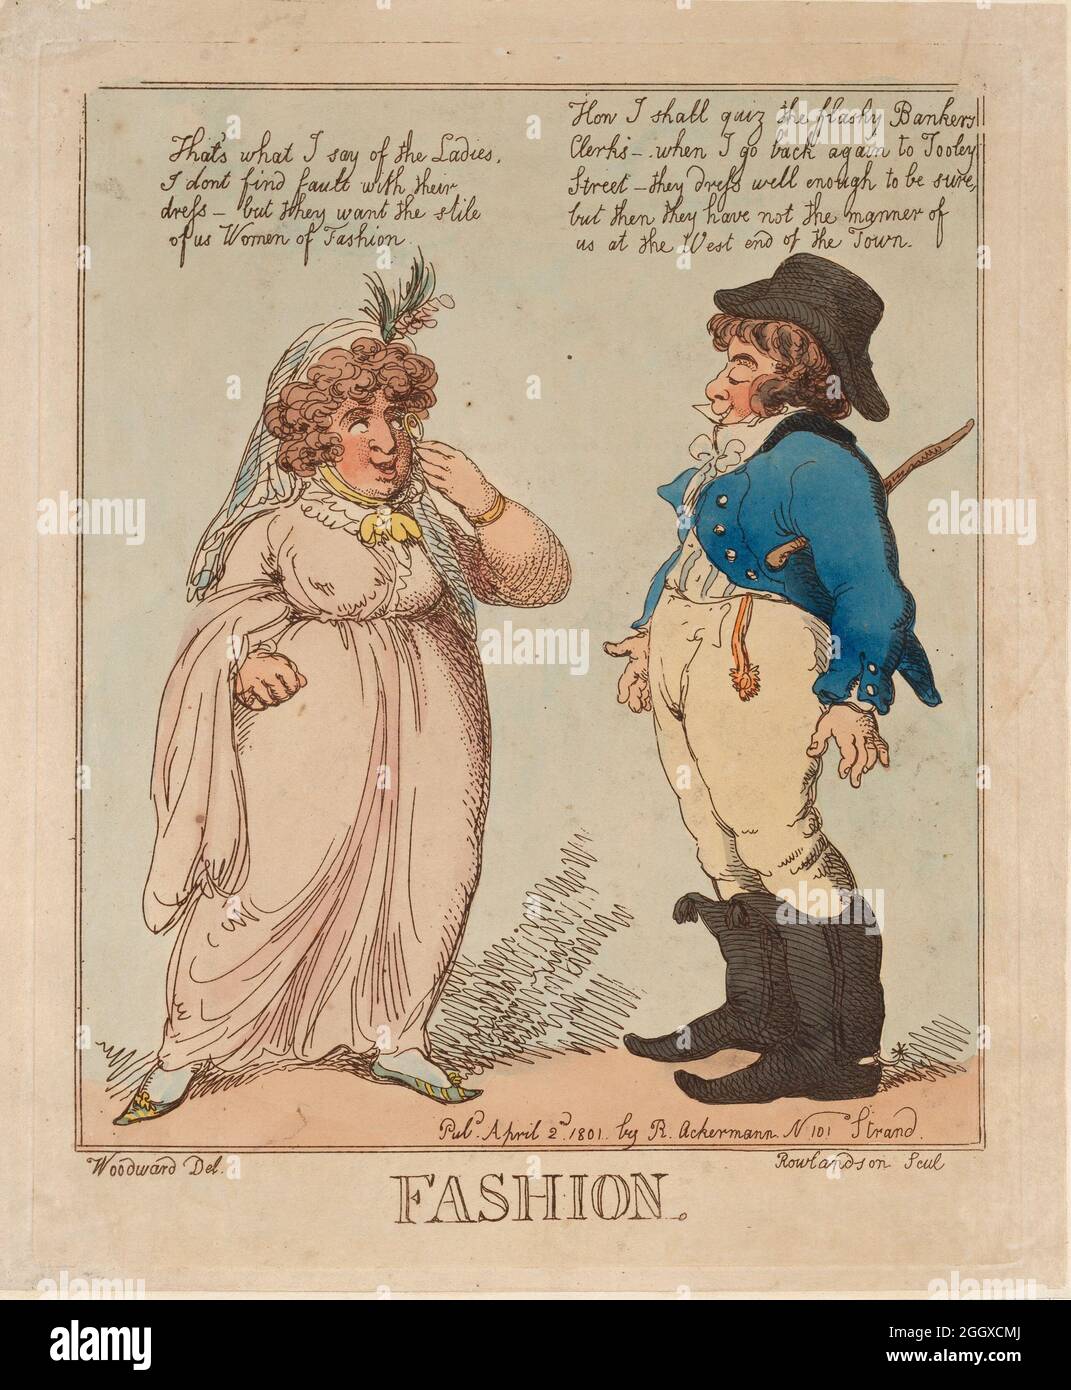 Fashion 1801 Artist: Thomas Rowlandson (1756-1827) an English artist and caricaturist of the Georgian Era. A social observer, he was a prolific artist and print maker.  Credit: Levenson Collection/Alamy Stock Photo